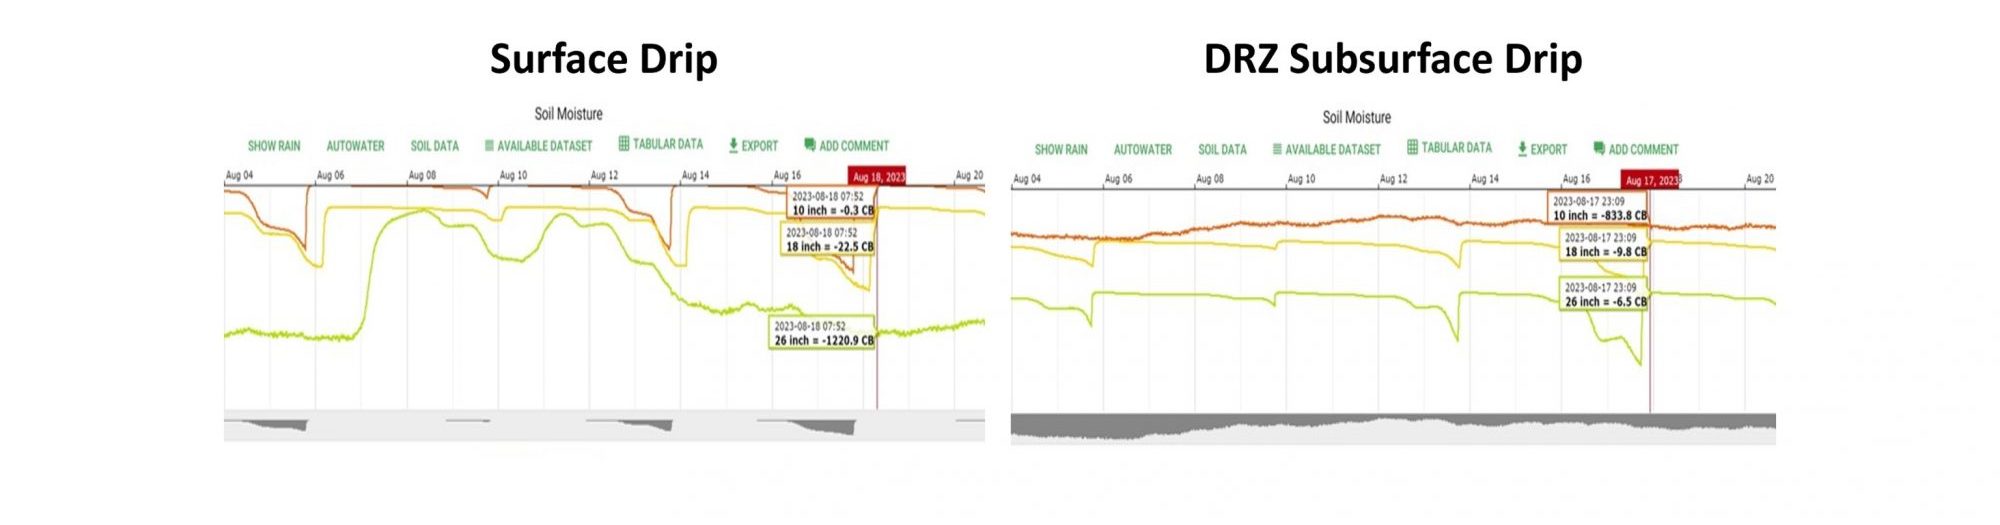 Fig. 2. Comparison of relative water available under surface drip (L) and subsurface drip irrigation (R) using electronic soil water tensiometers placed at depths of 25, 46, and 60 cm depths into the soil profile.